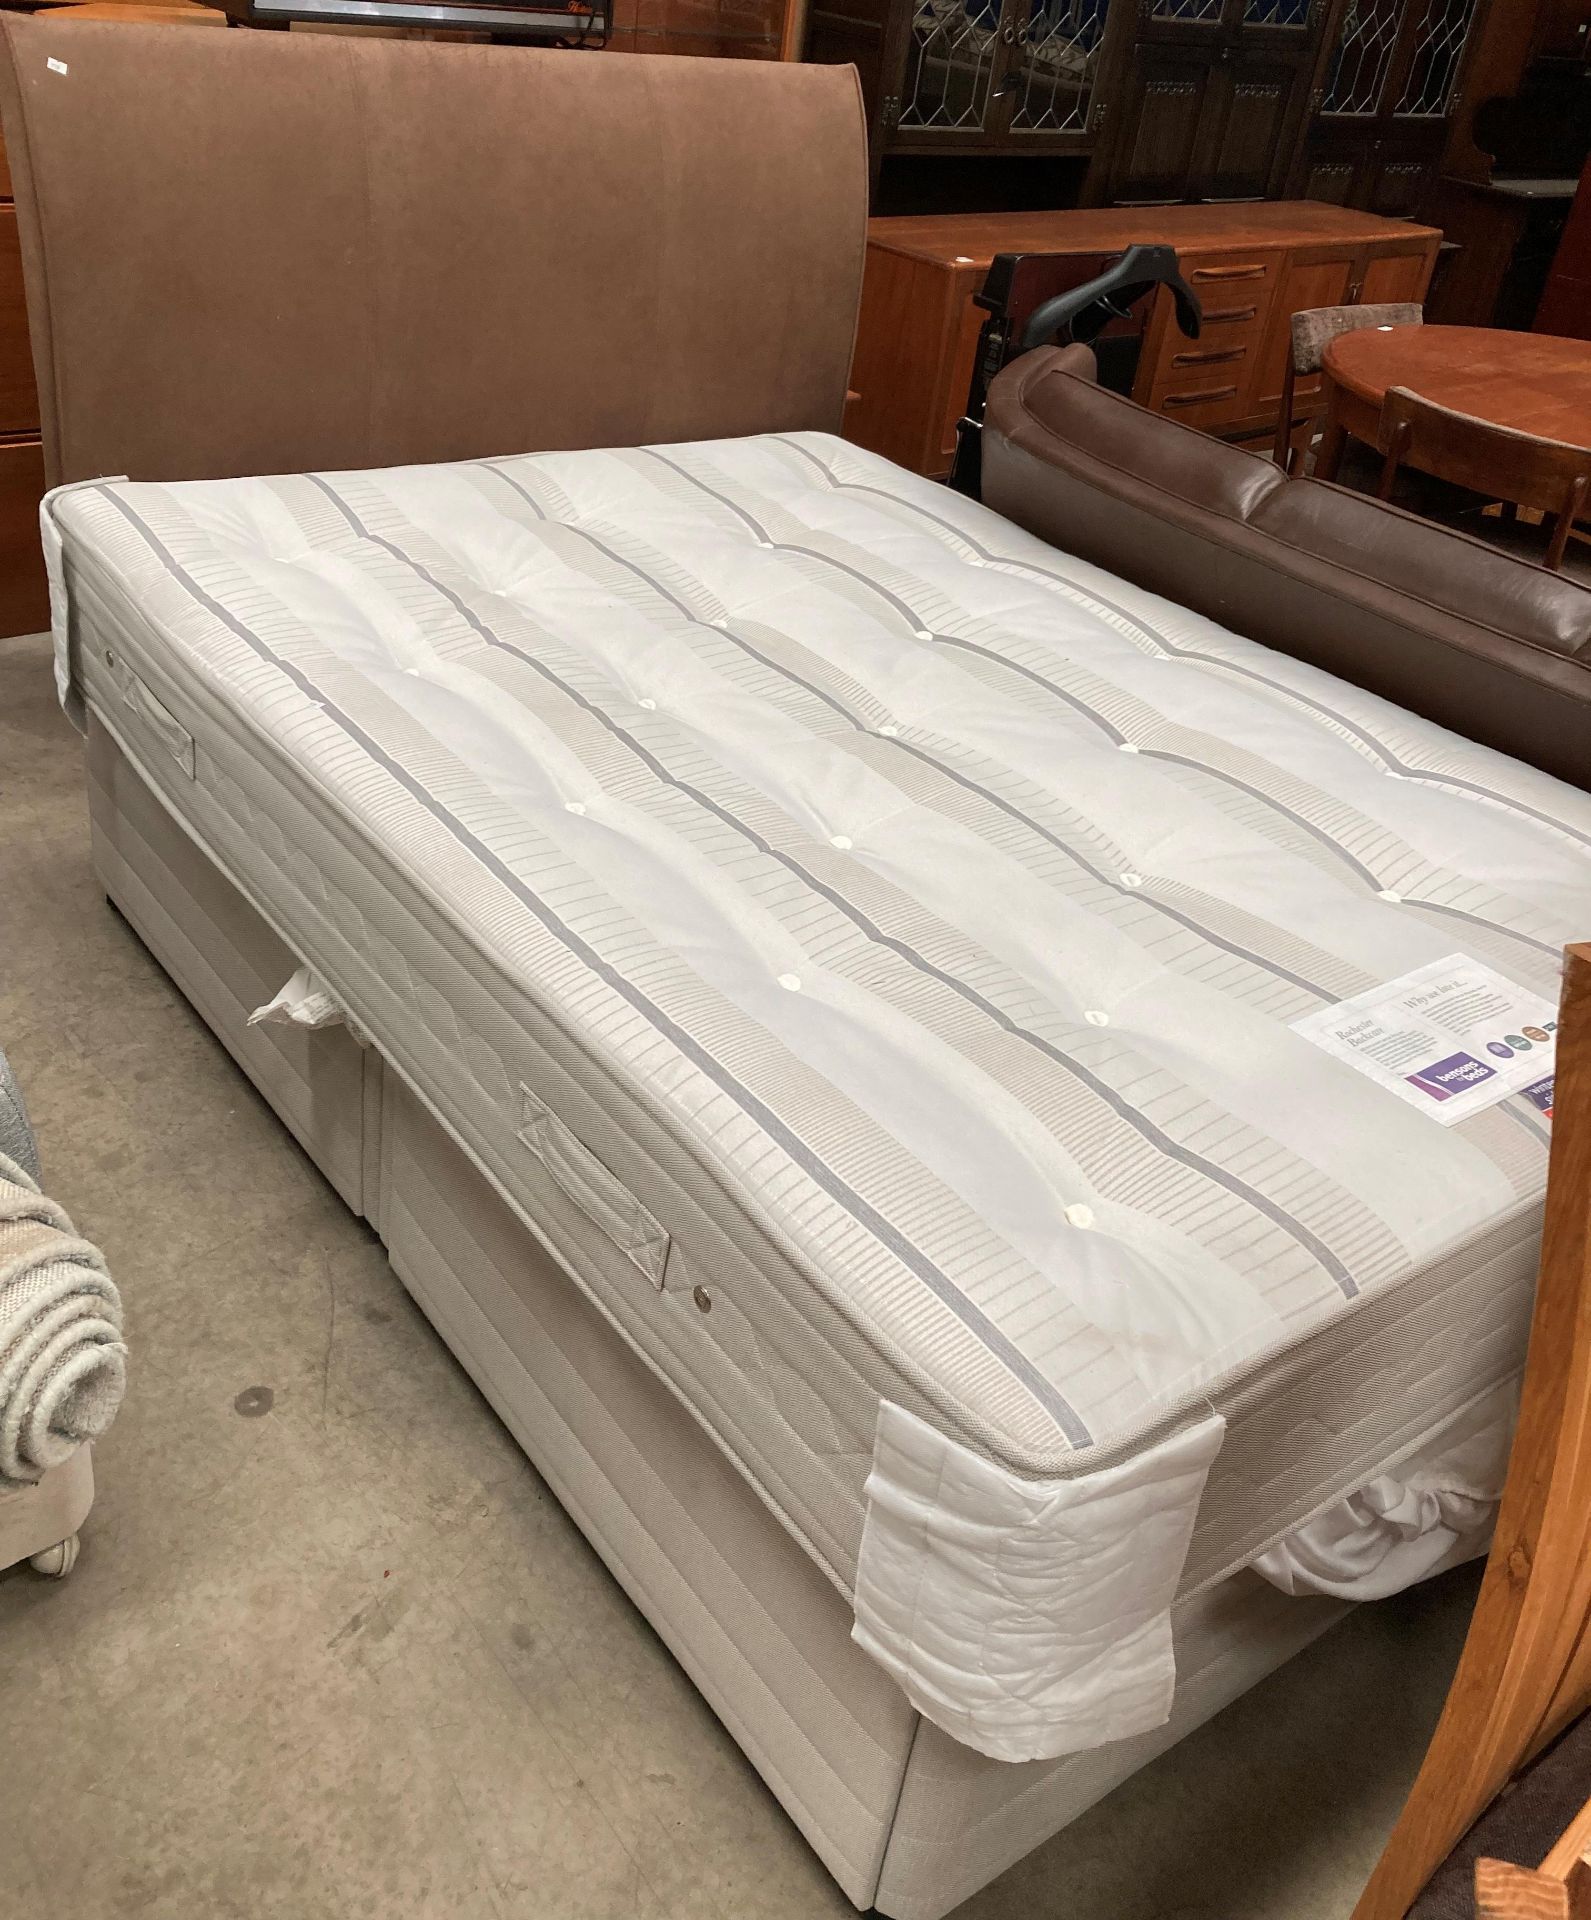 A 4' 6" four drawer divan bed base with Bensons For Beds dual winter/summer side mattress in grey